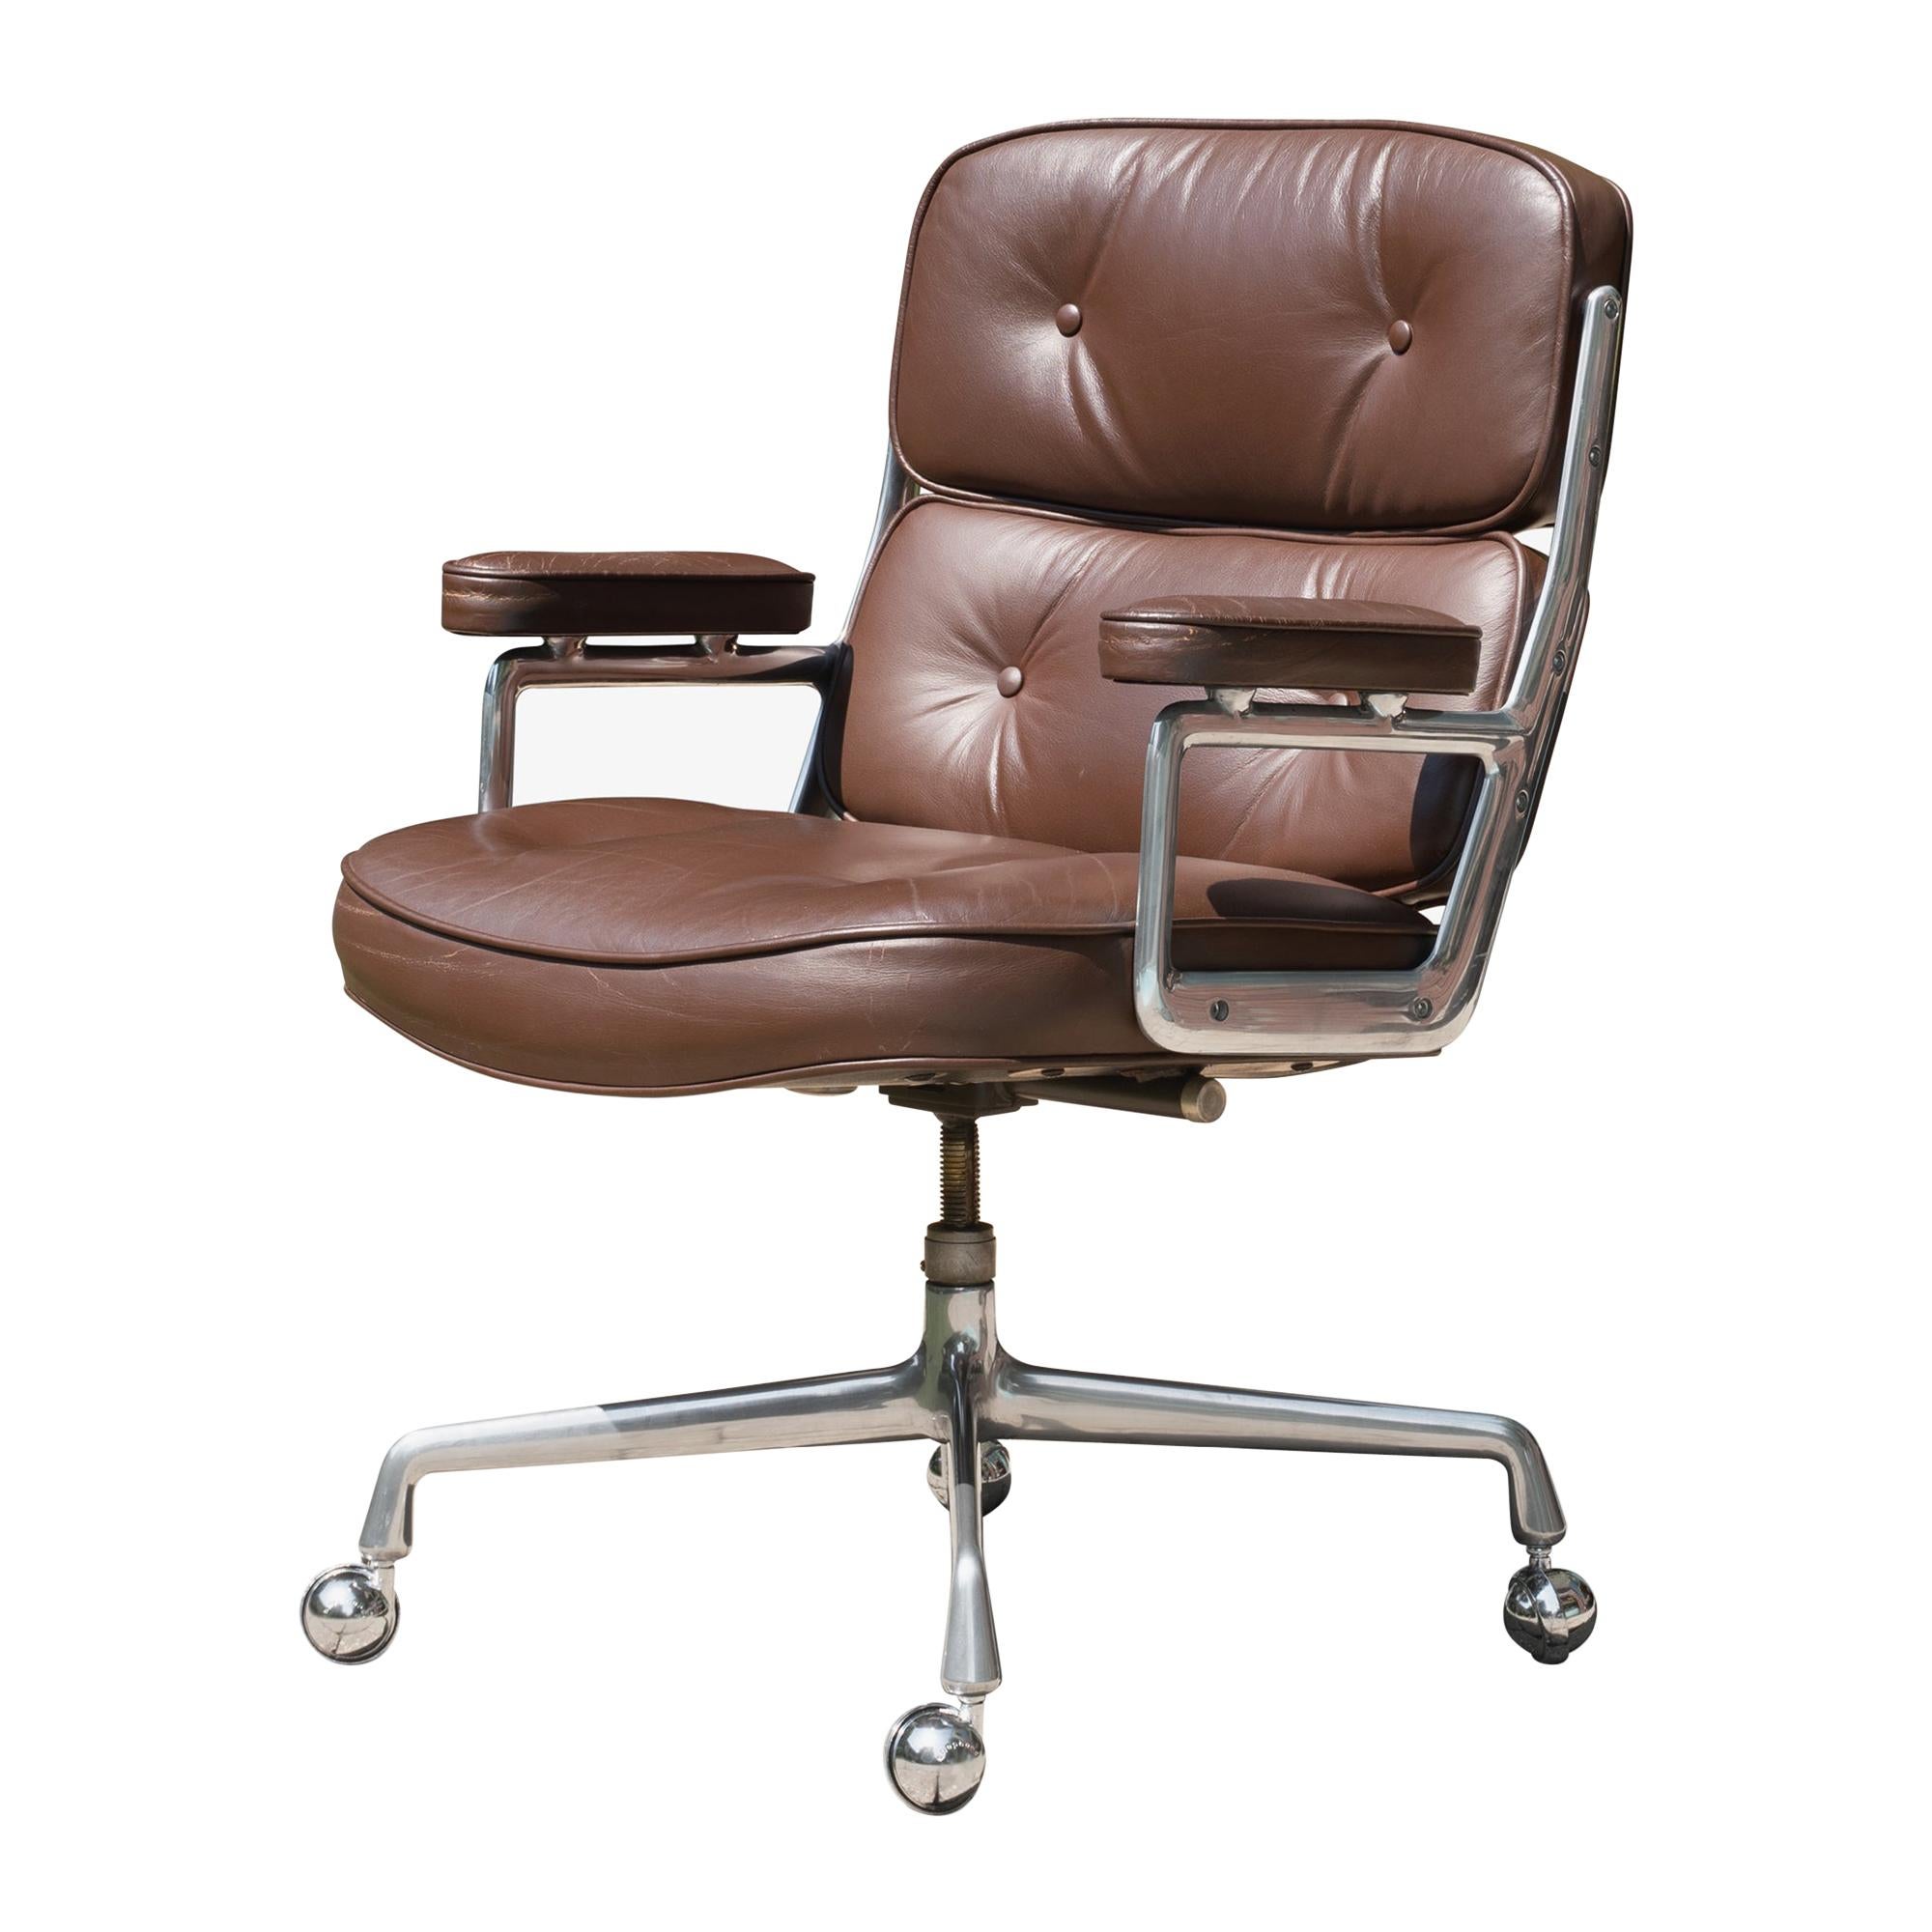 "Time-Life" Executive Chair in Leather by Charles & Ray Eames for Herman Miller